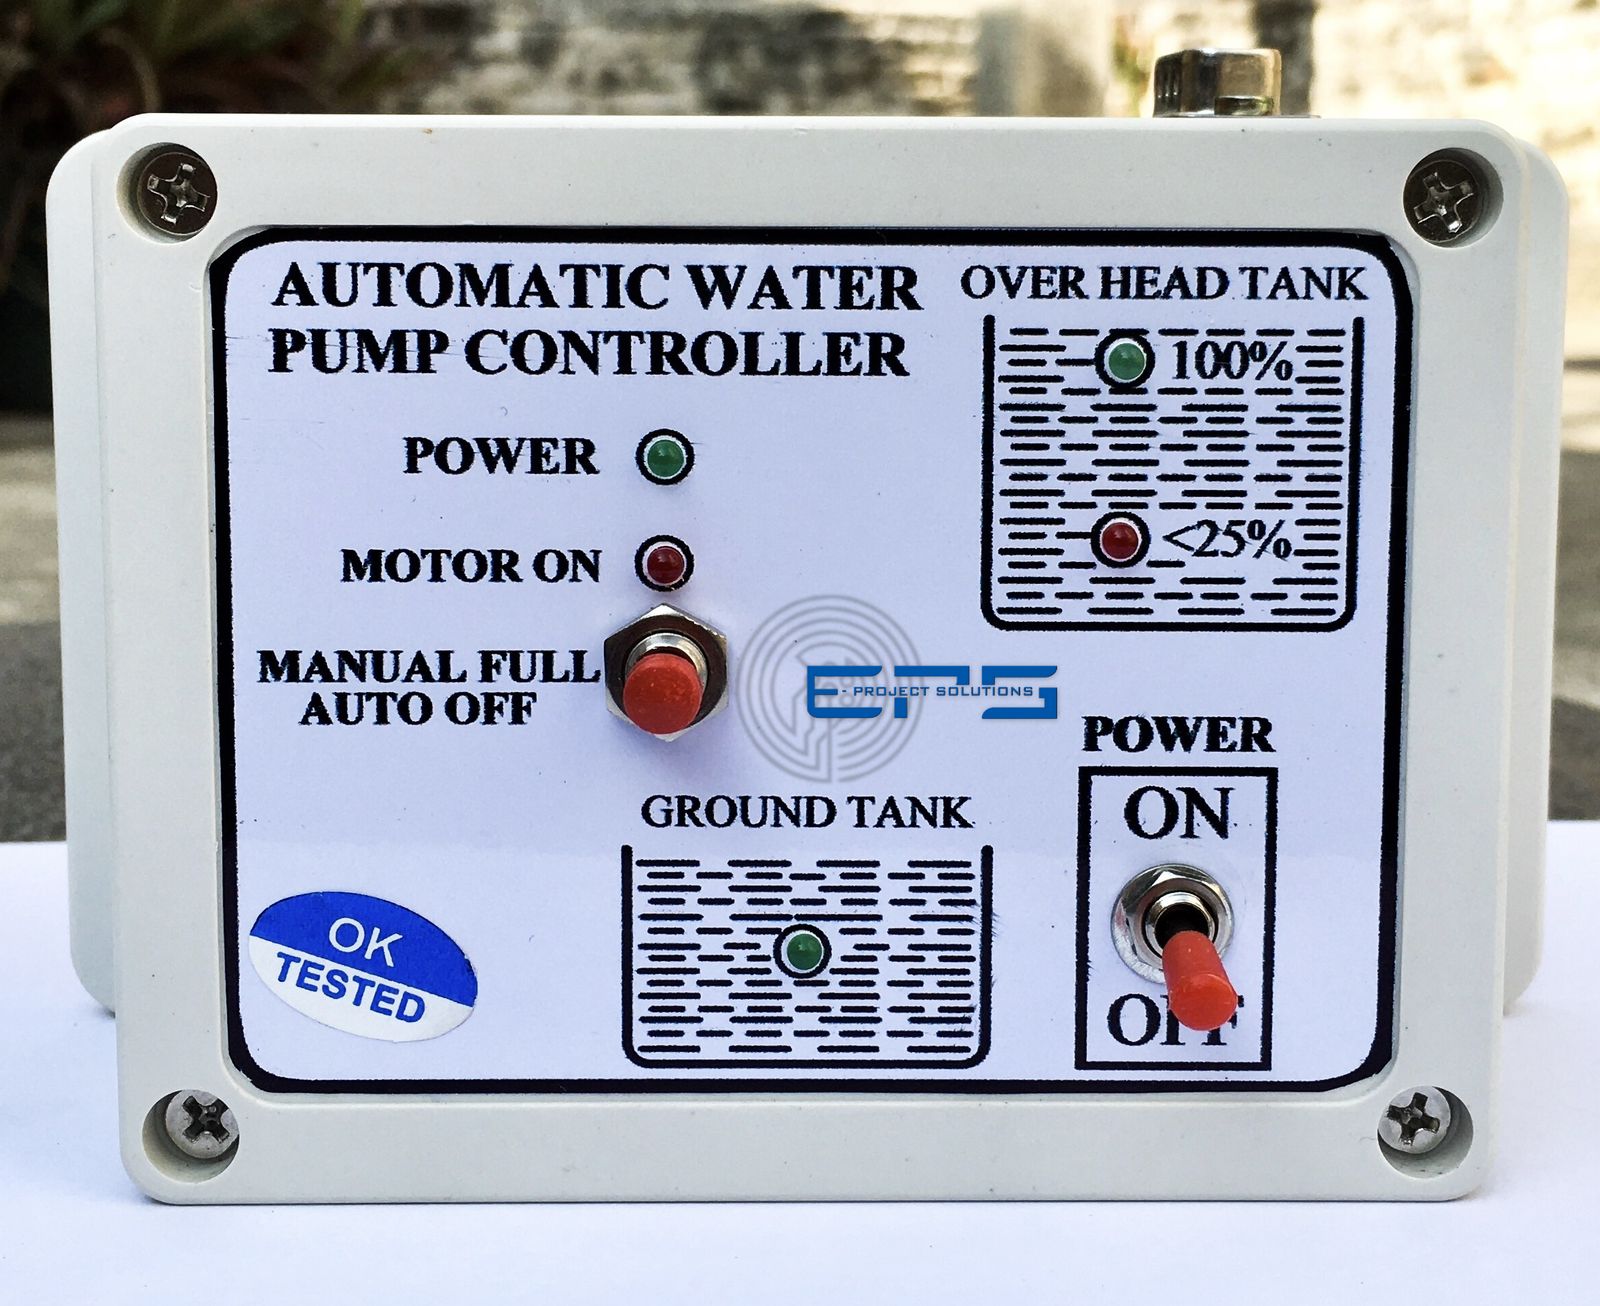 Automatic water pump controller